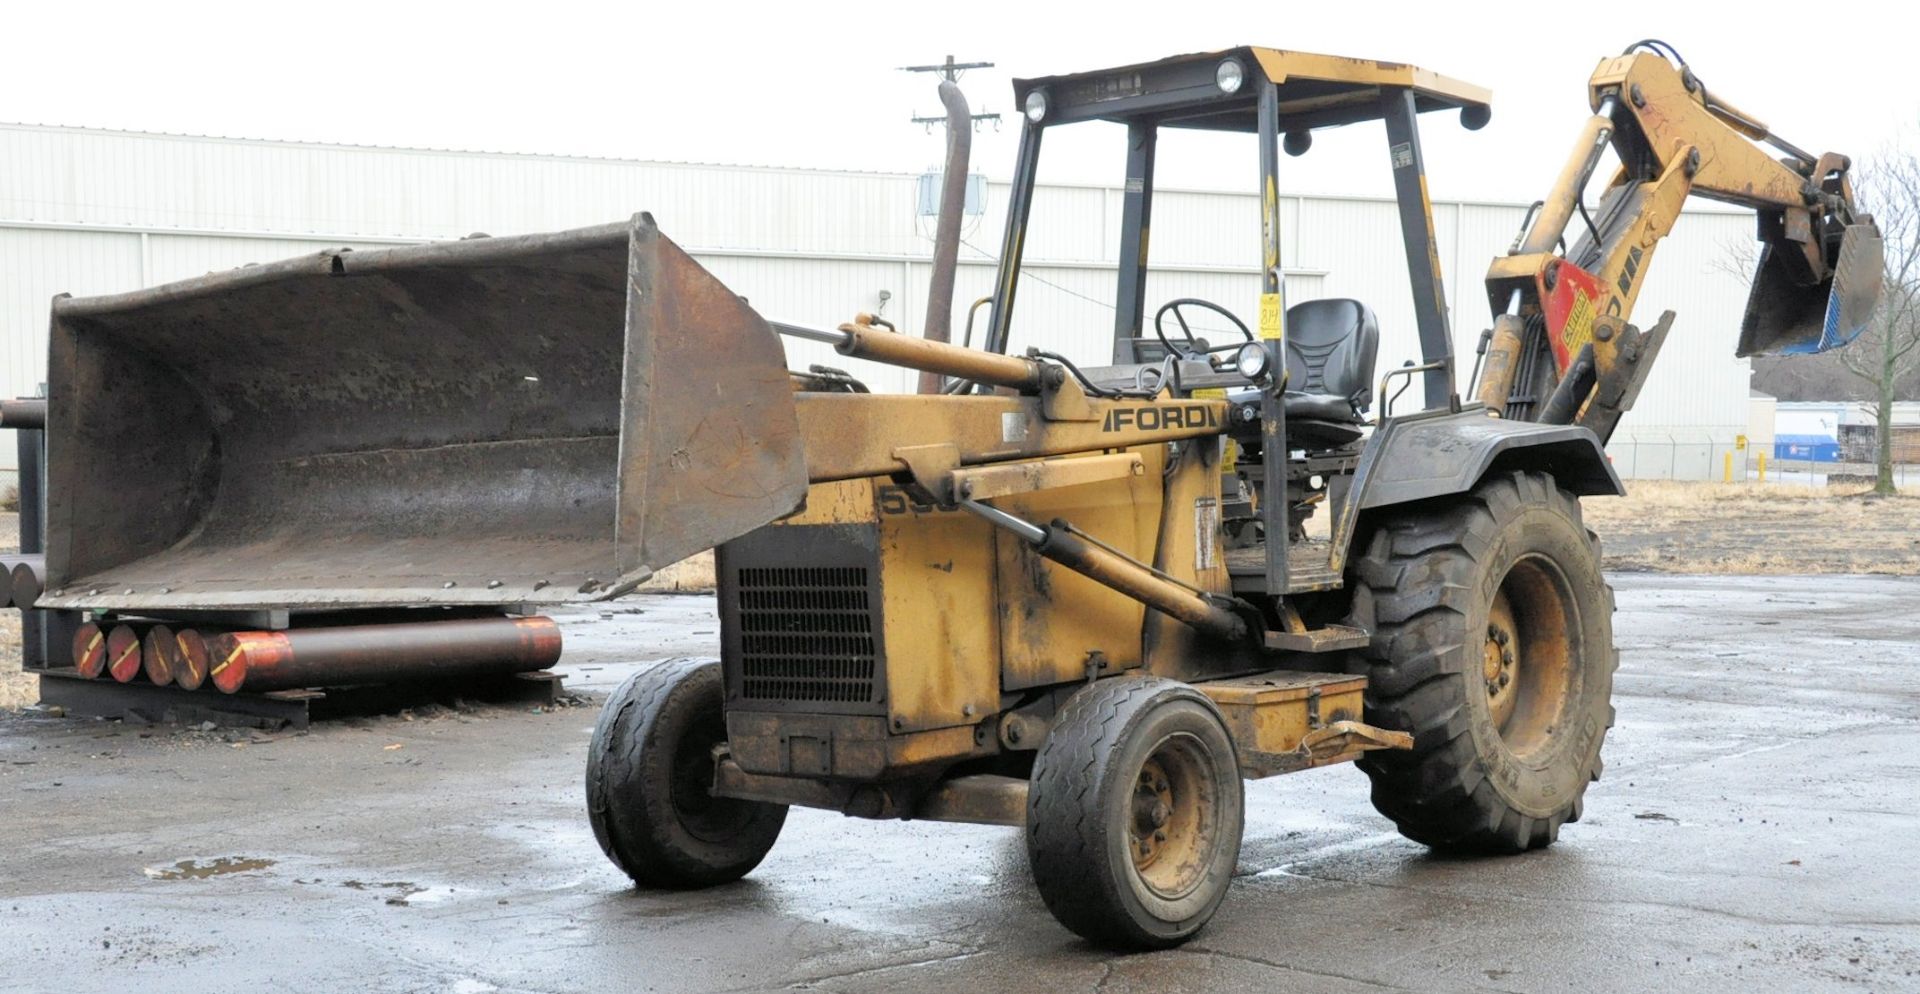 Ford/New Holland Model 555D Back Hoe, Torque Convert Transmission with Clutch Disconnect, 84" Smooth